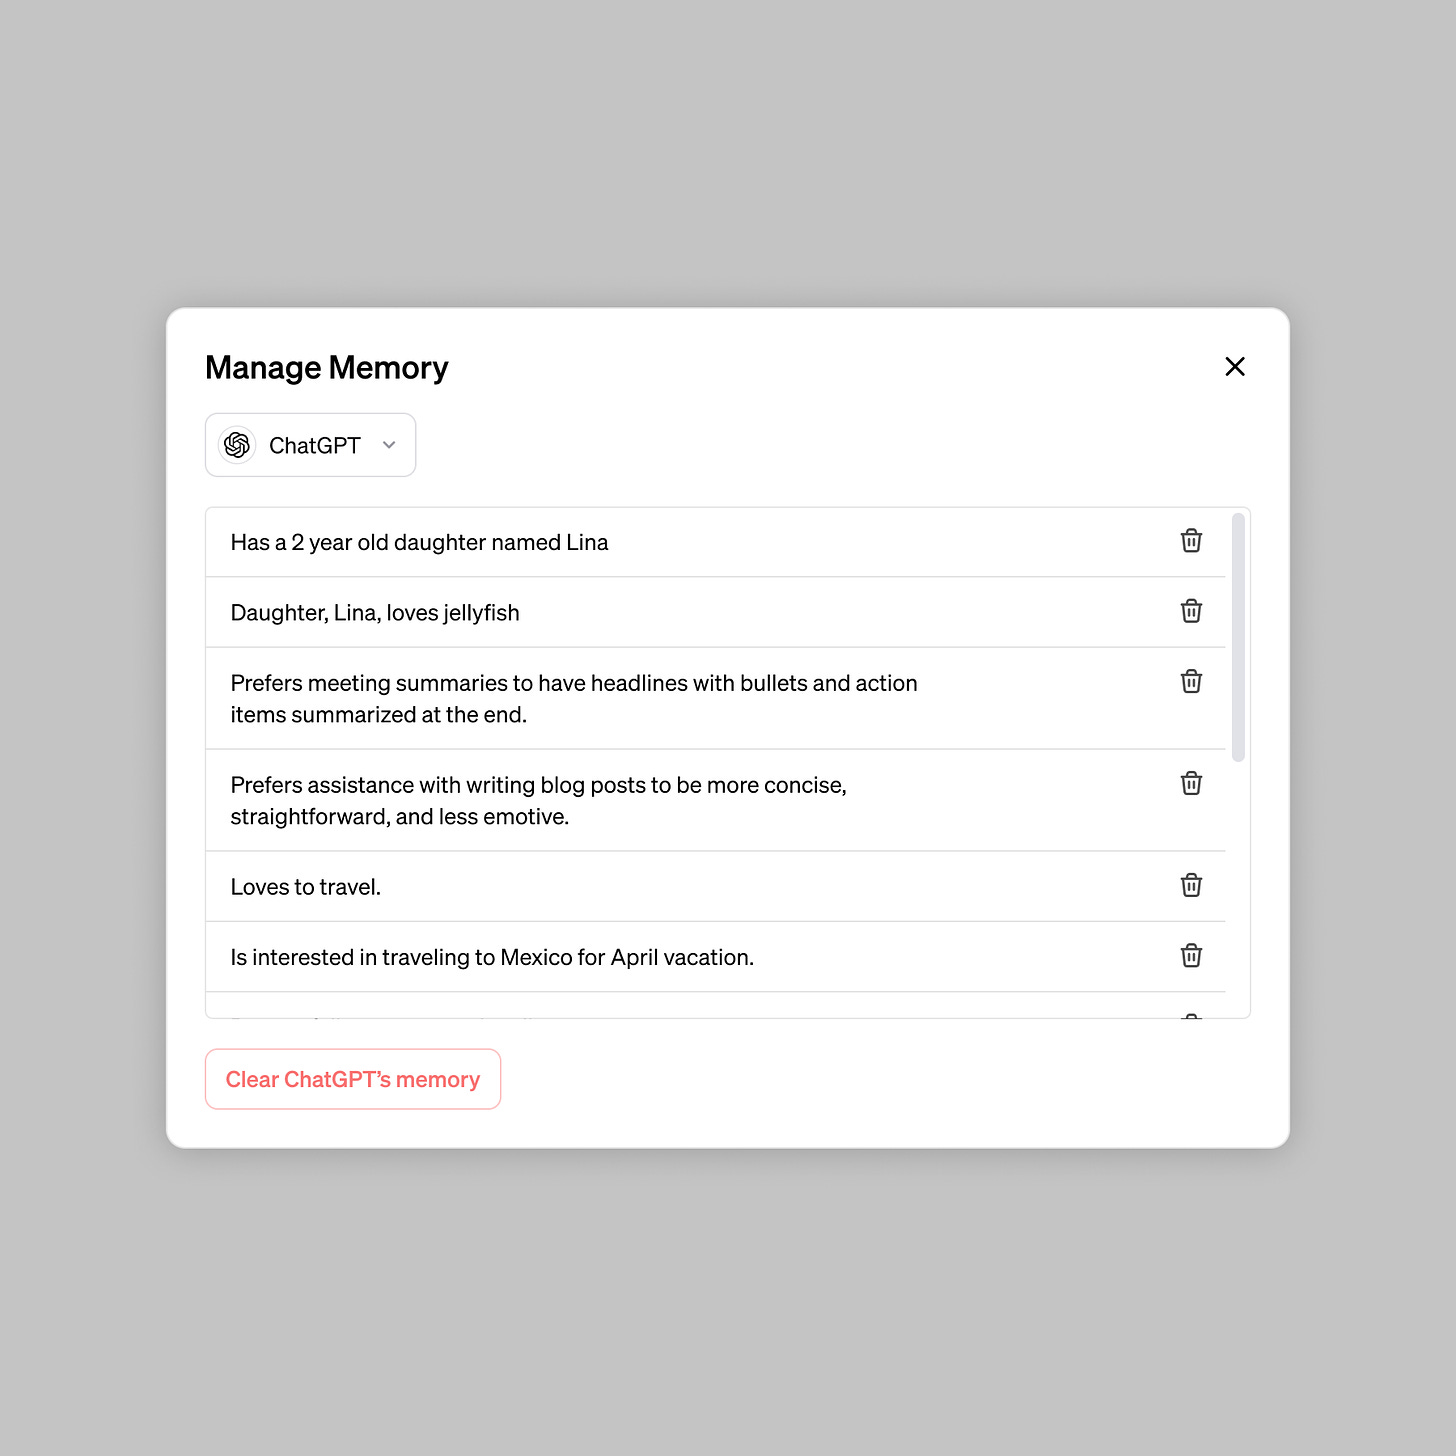 The "Manage Memory" settings dialog